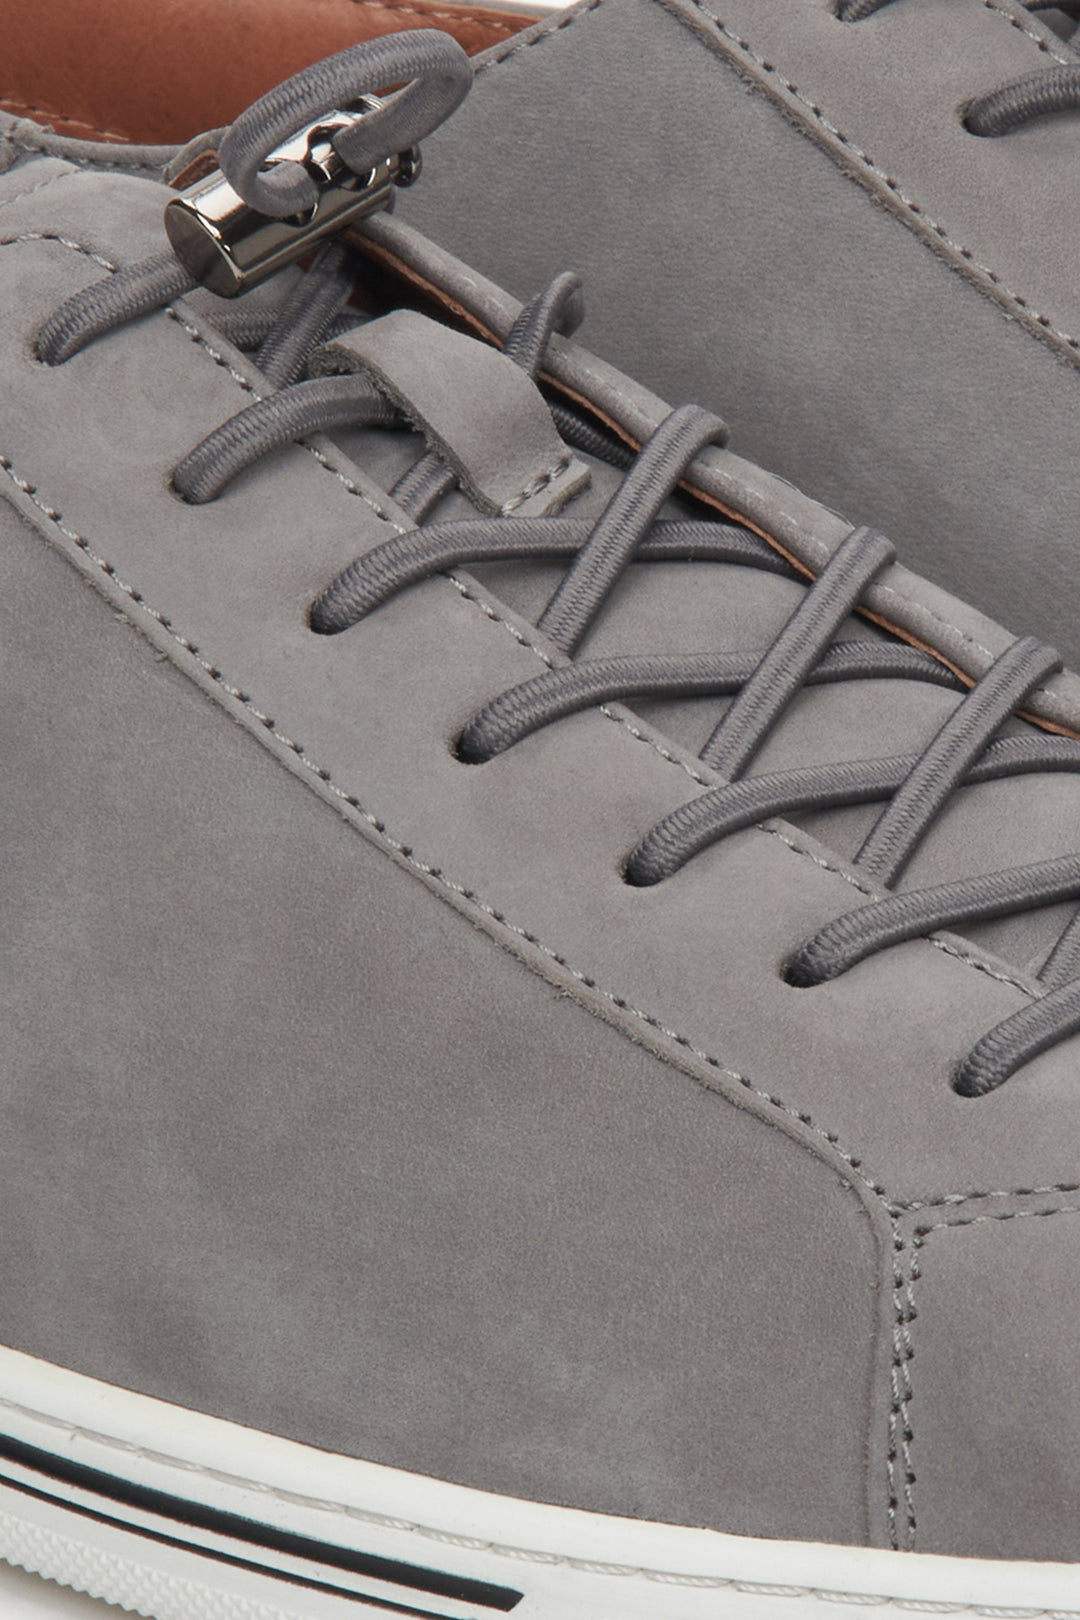 Grey Estro brand men's sneakers made of soft natural nubuck - close-up on the stitching and lacing system.